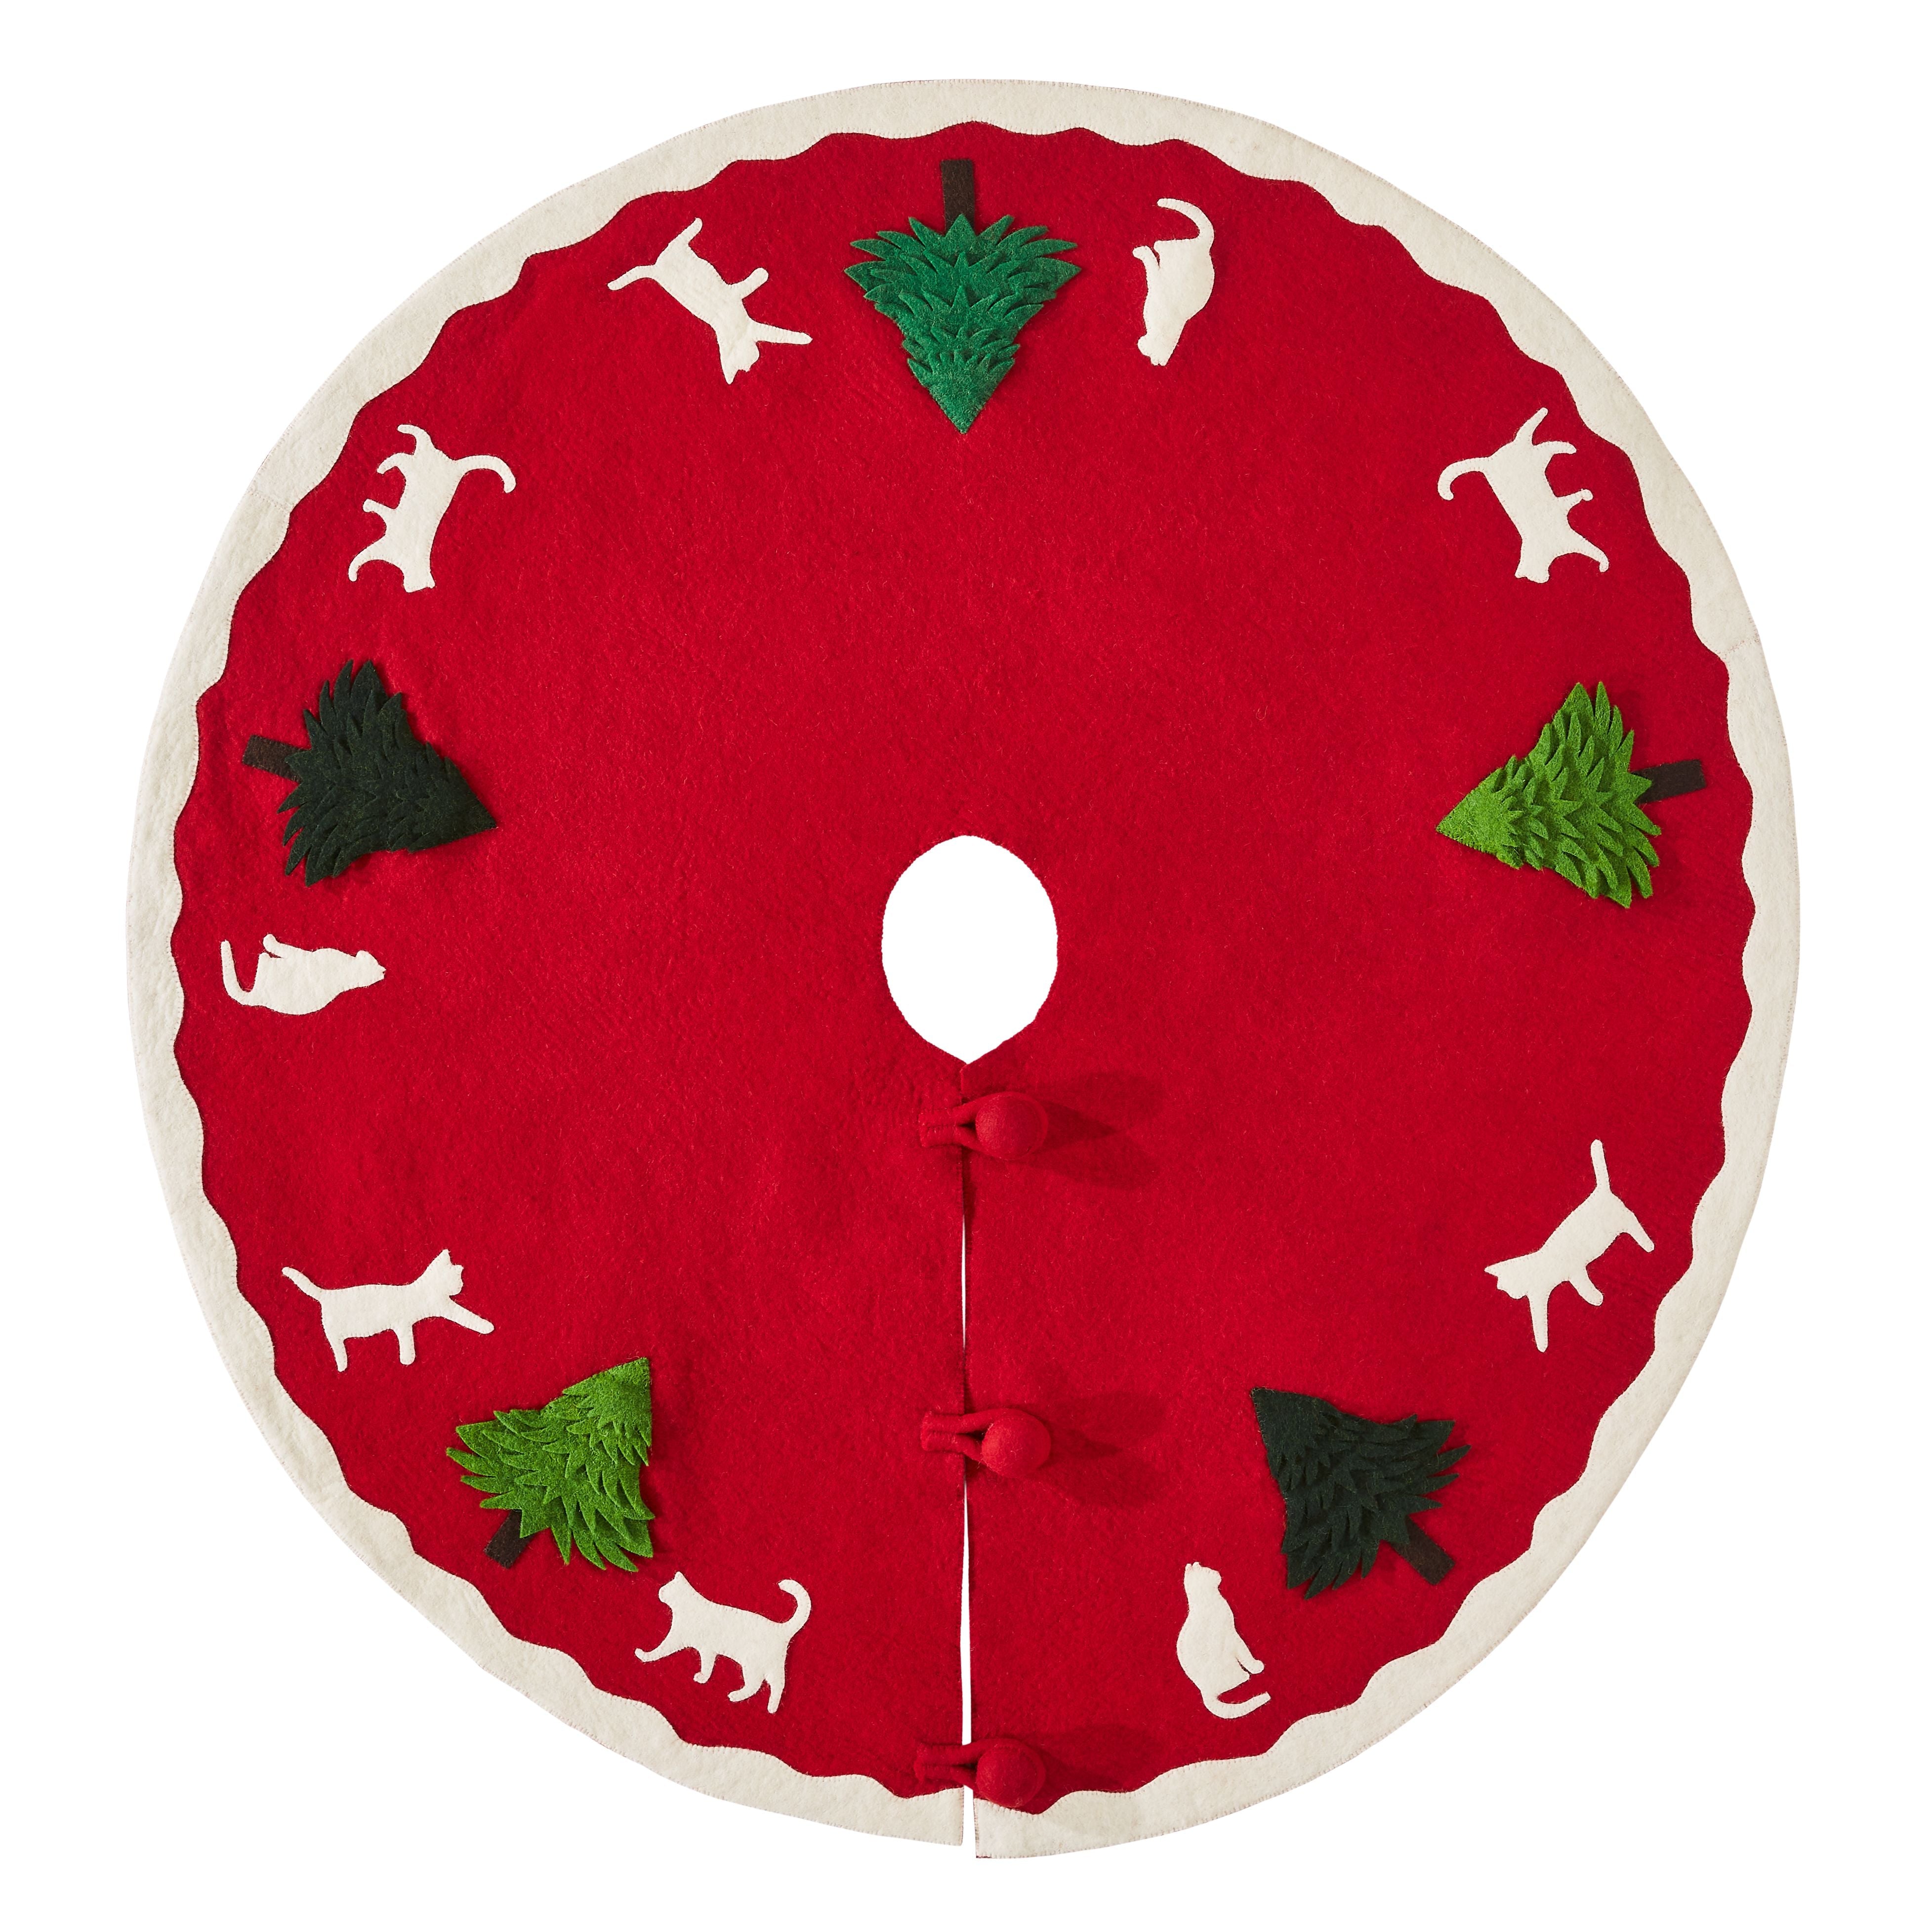 Cats & Green Trees Hand-felted Christmas Tree Skirt - 60"